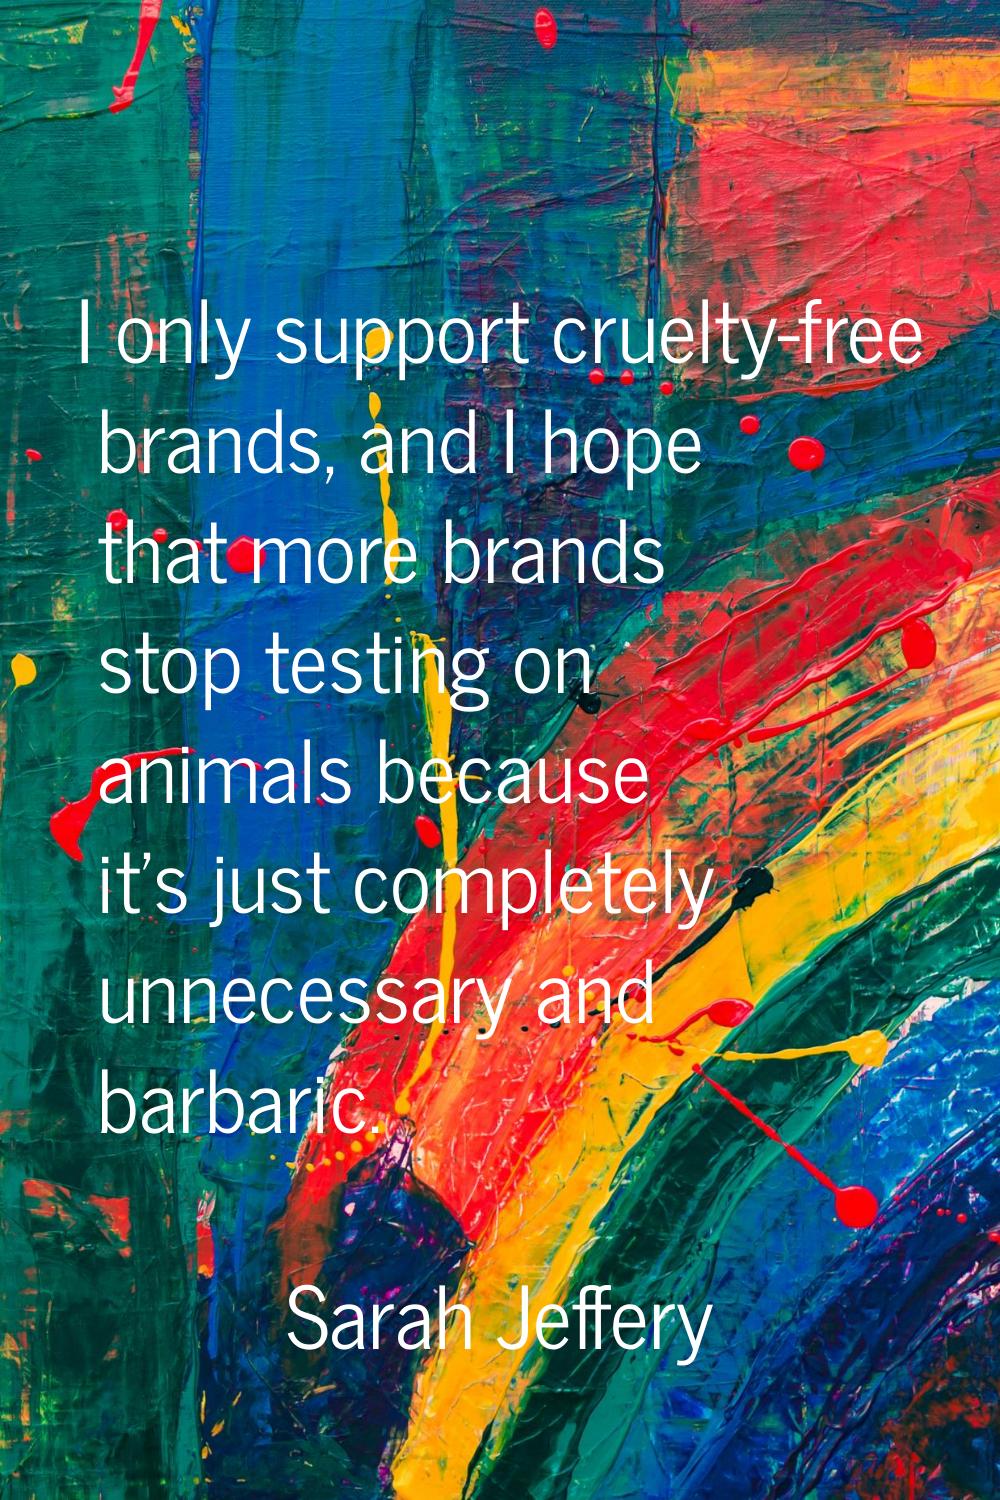 I only support cruelty-free brands, and I hope that more brands stop testing on animals because it'